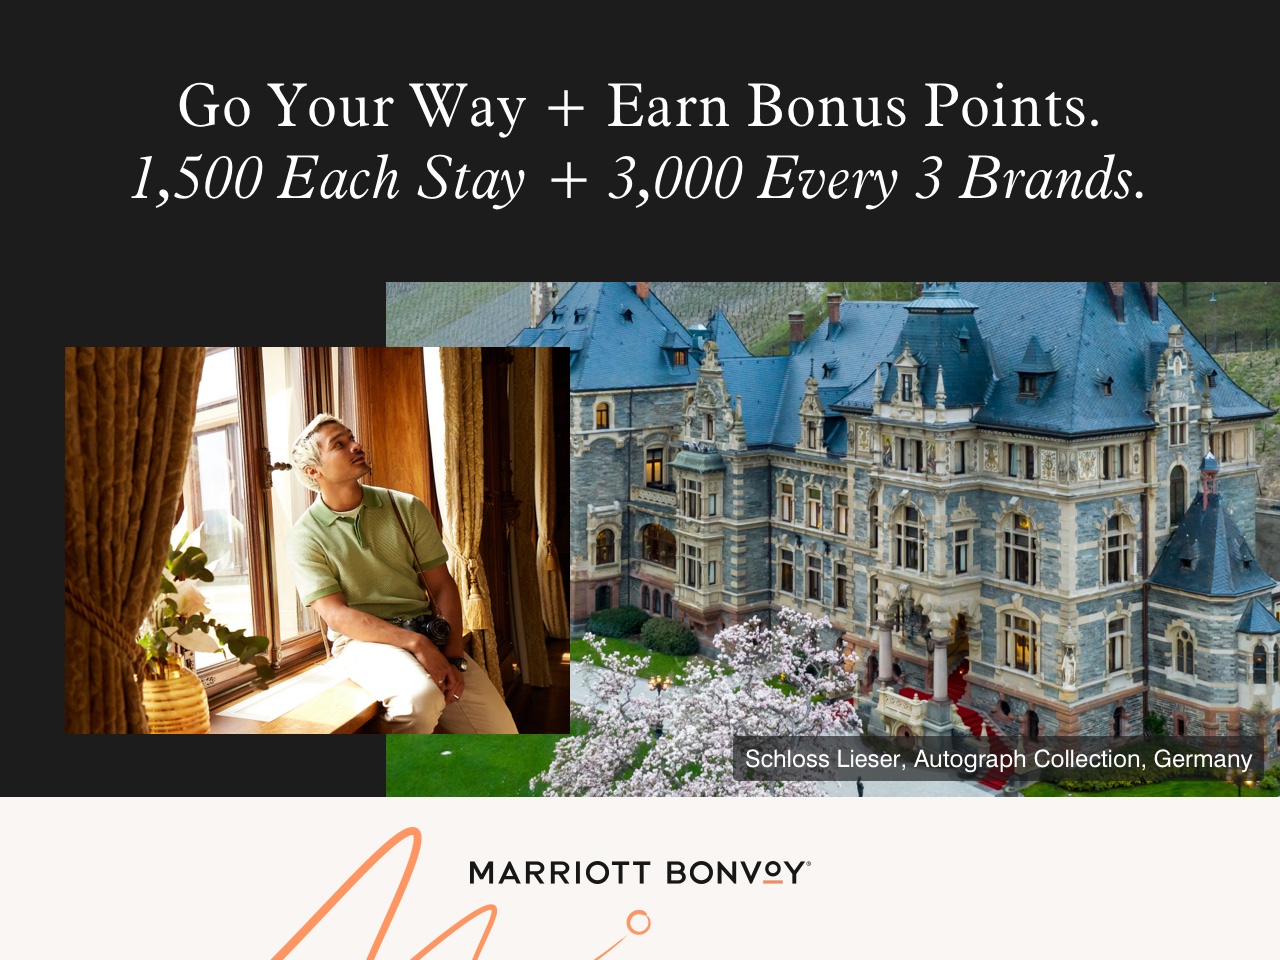 Go Your Own Way and Earn More During Marriott Bonvoy’s Fall Global Promotion